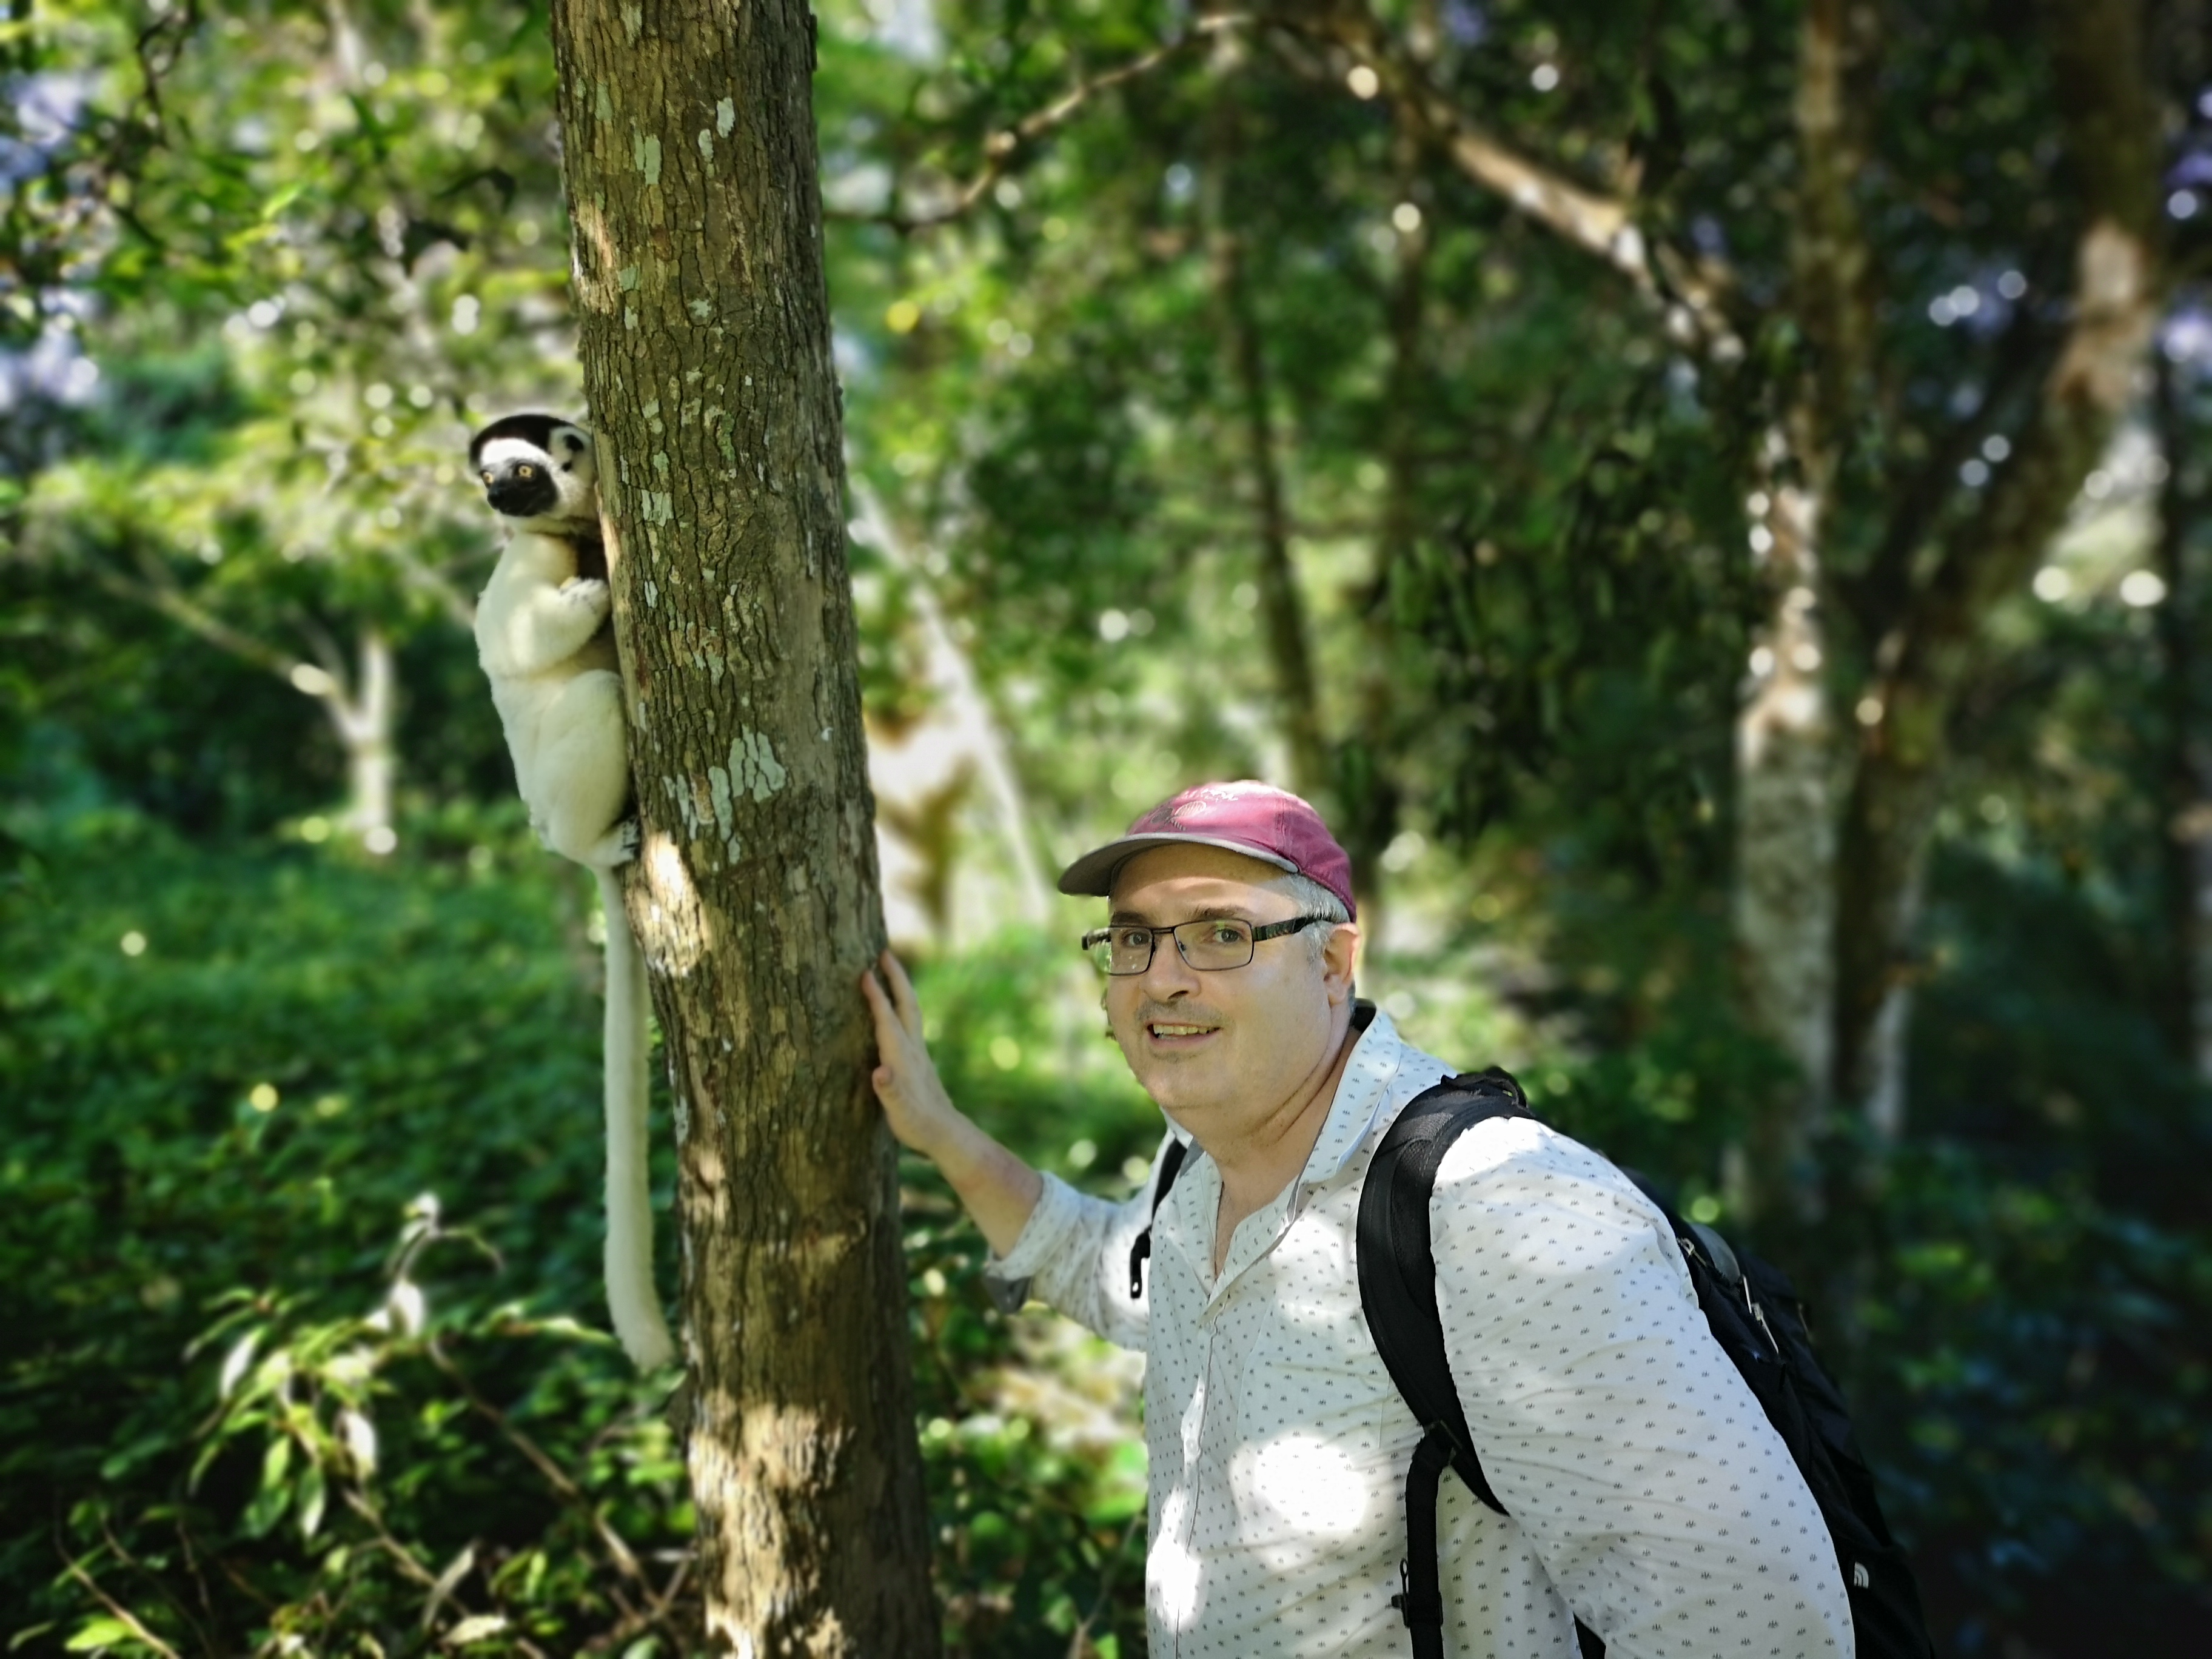 Stunning land and waterscapes and the obligatory lemur shot – J. Skinner and R. Rossizelà, April 2019